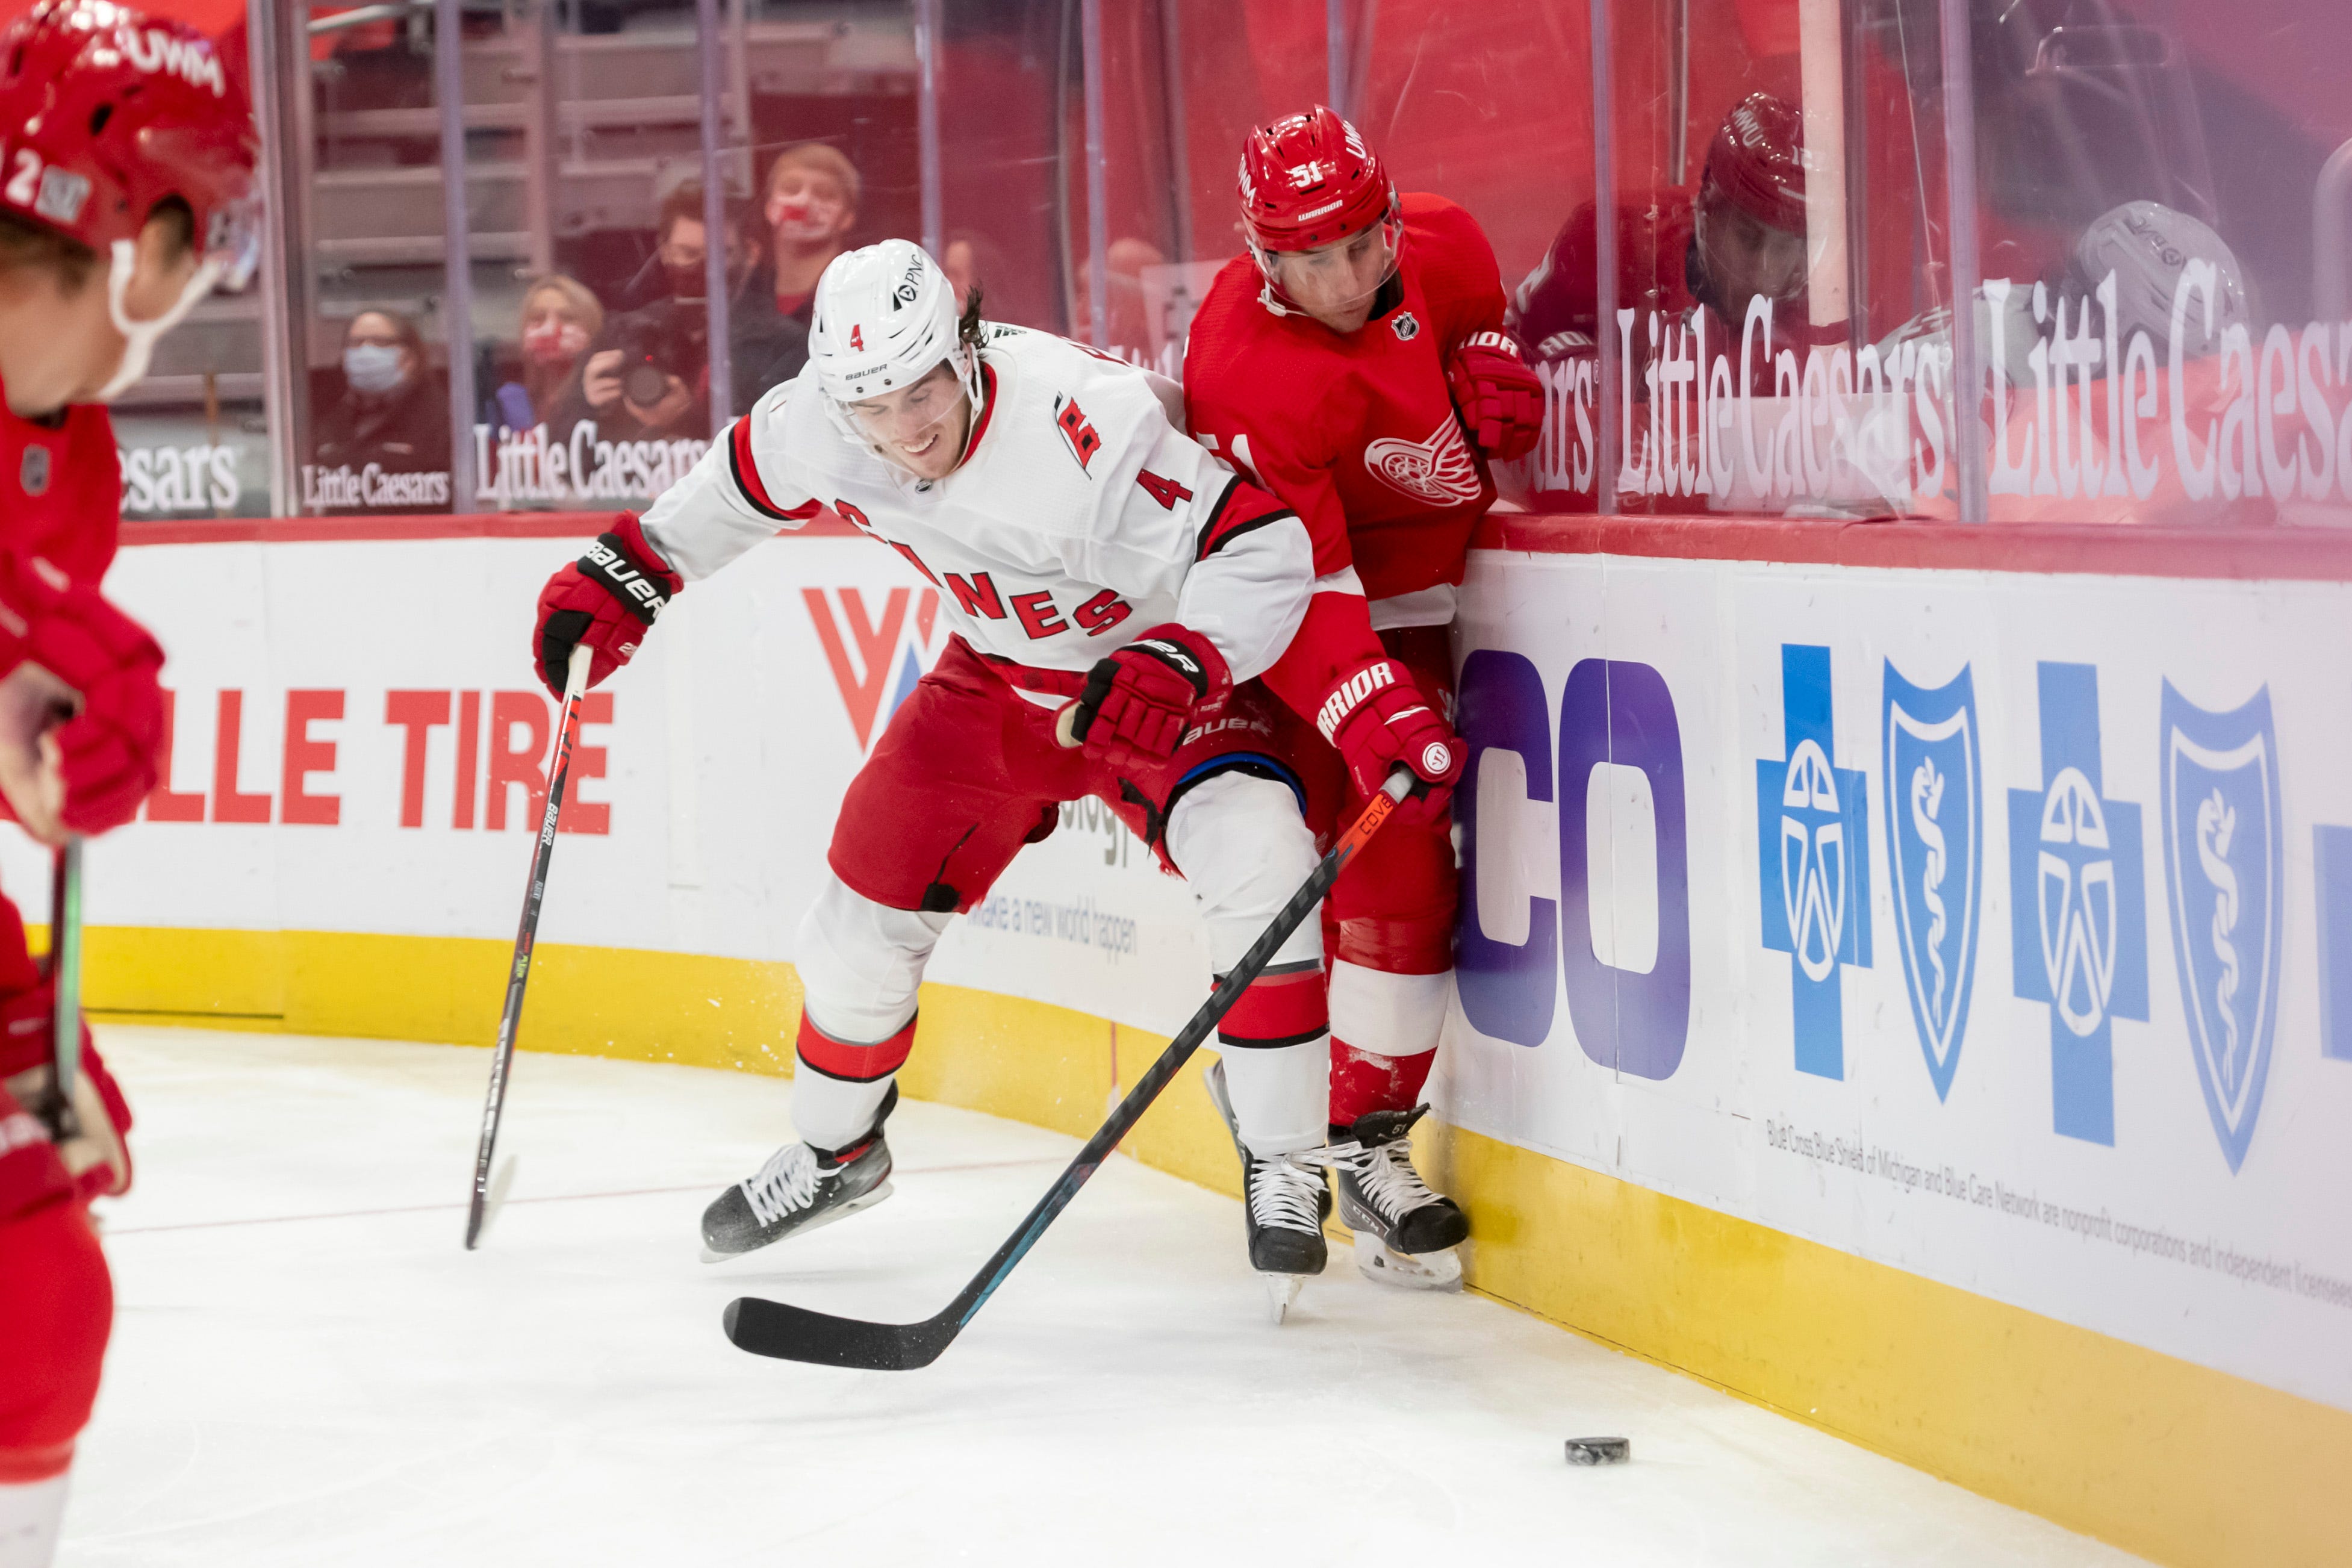 Carolina defenseman Haydn Fleury and Detroit center Valtteri Filppula battle for the puck along the boards in the third period.